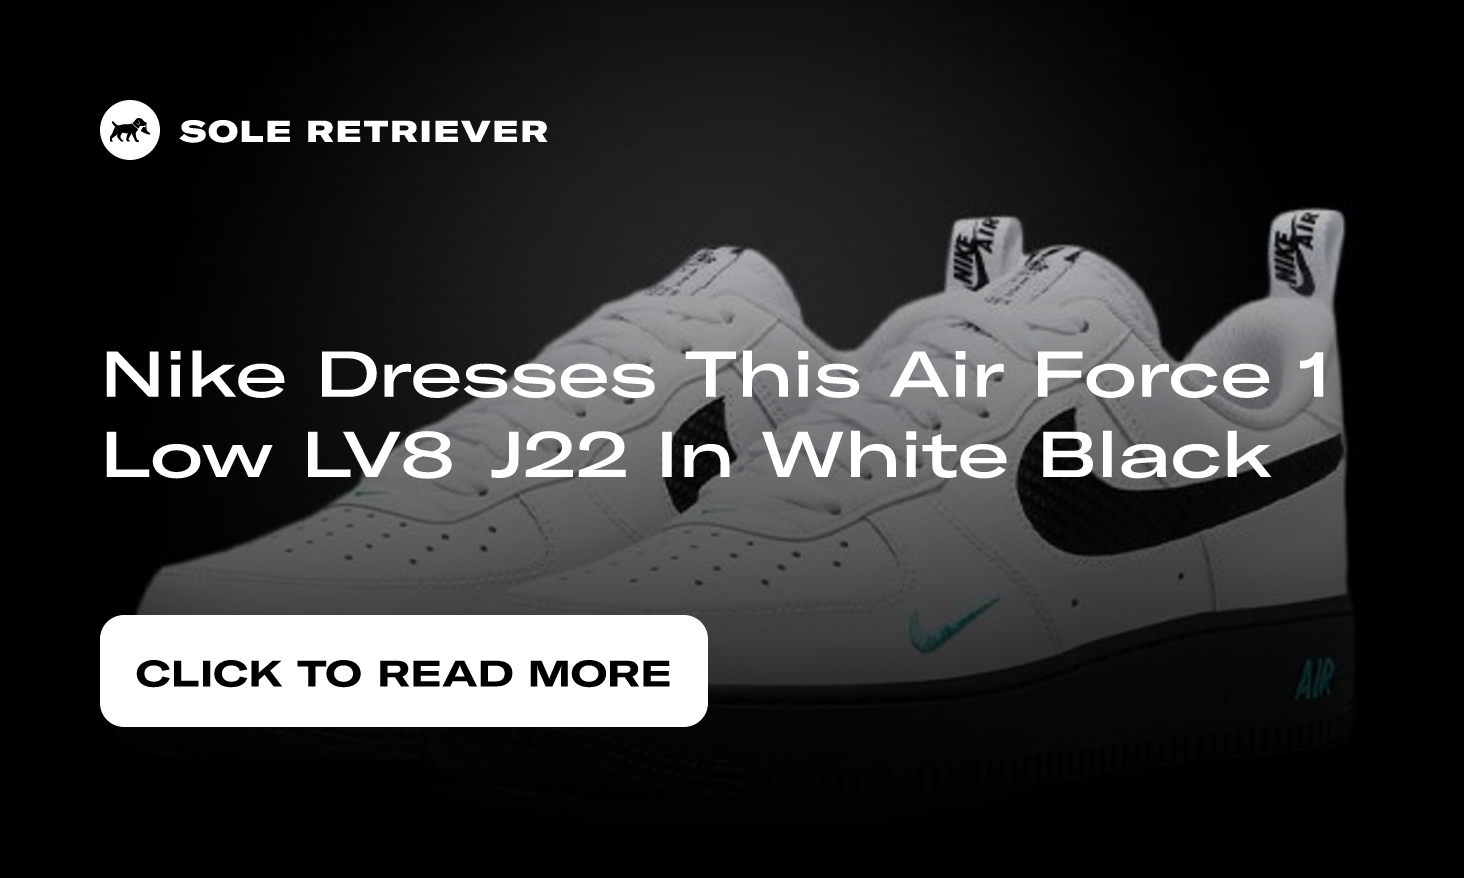 Nike Air Force 1 Low Cut-Out Swoosh (White/Black/Washed Teal/White) - Style  Code: DR0155-100 